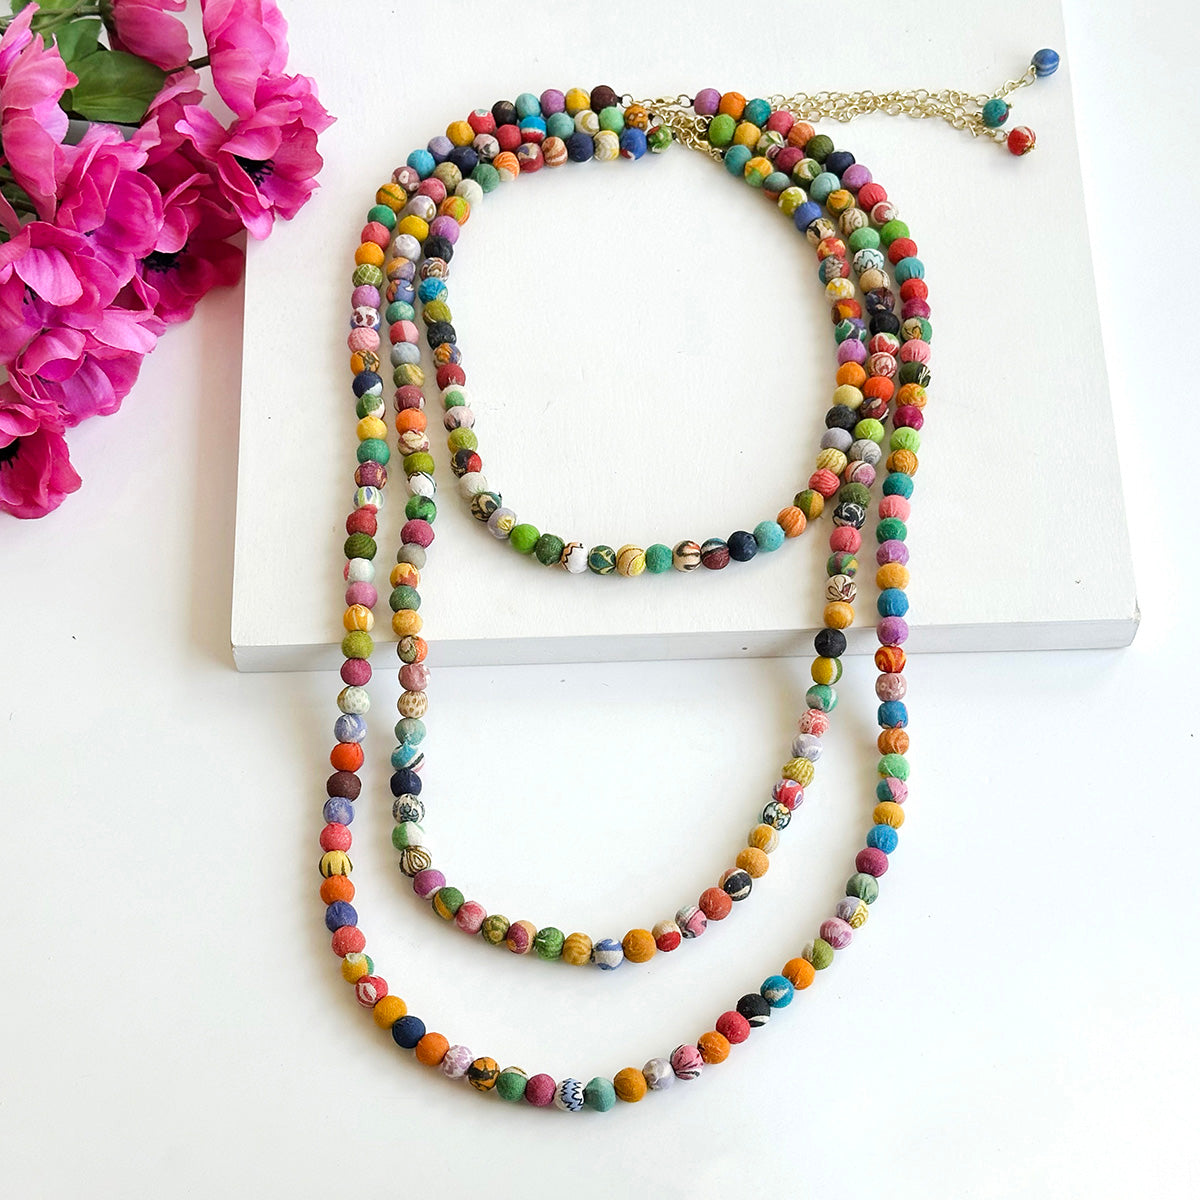 Angelco Accessories single strand kantha medium necklace on white flatlay with necklaces of other lengths